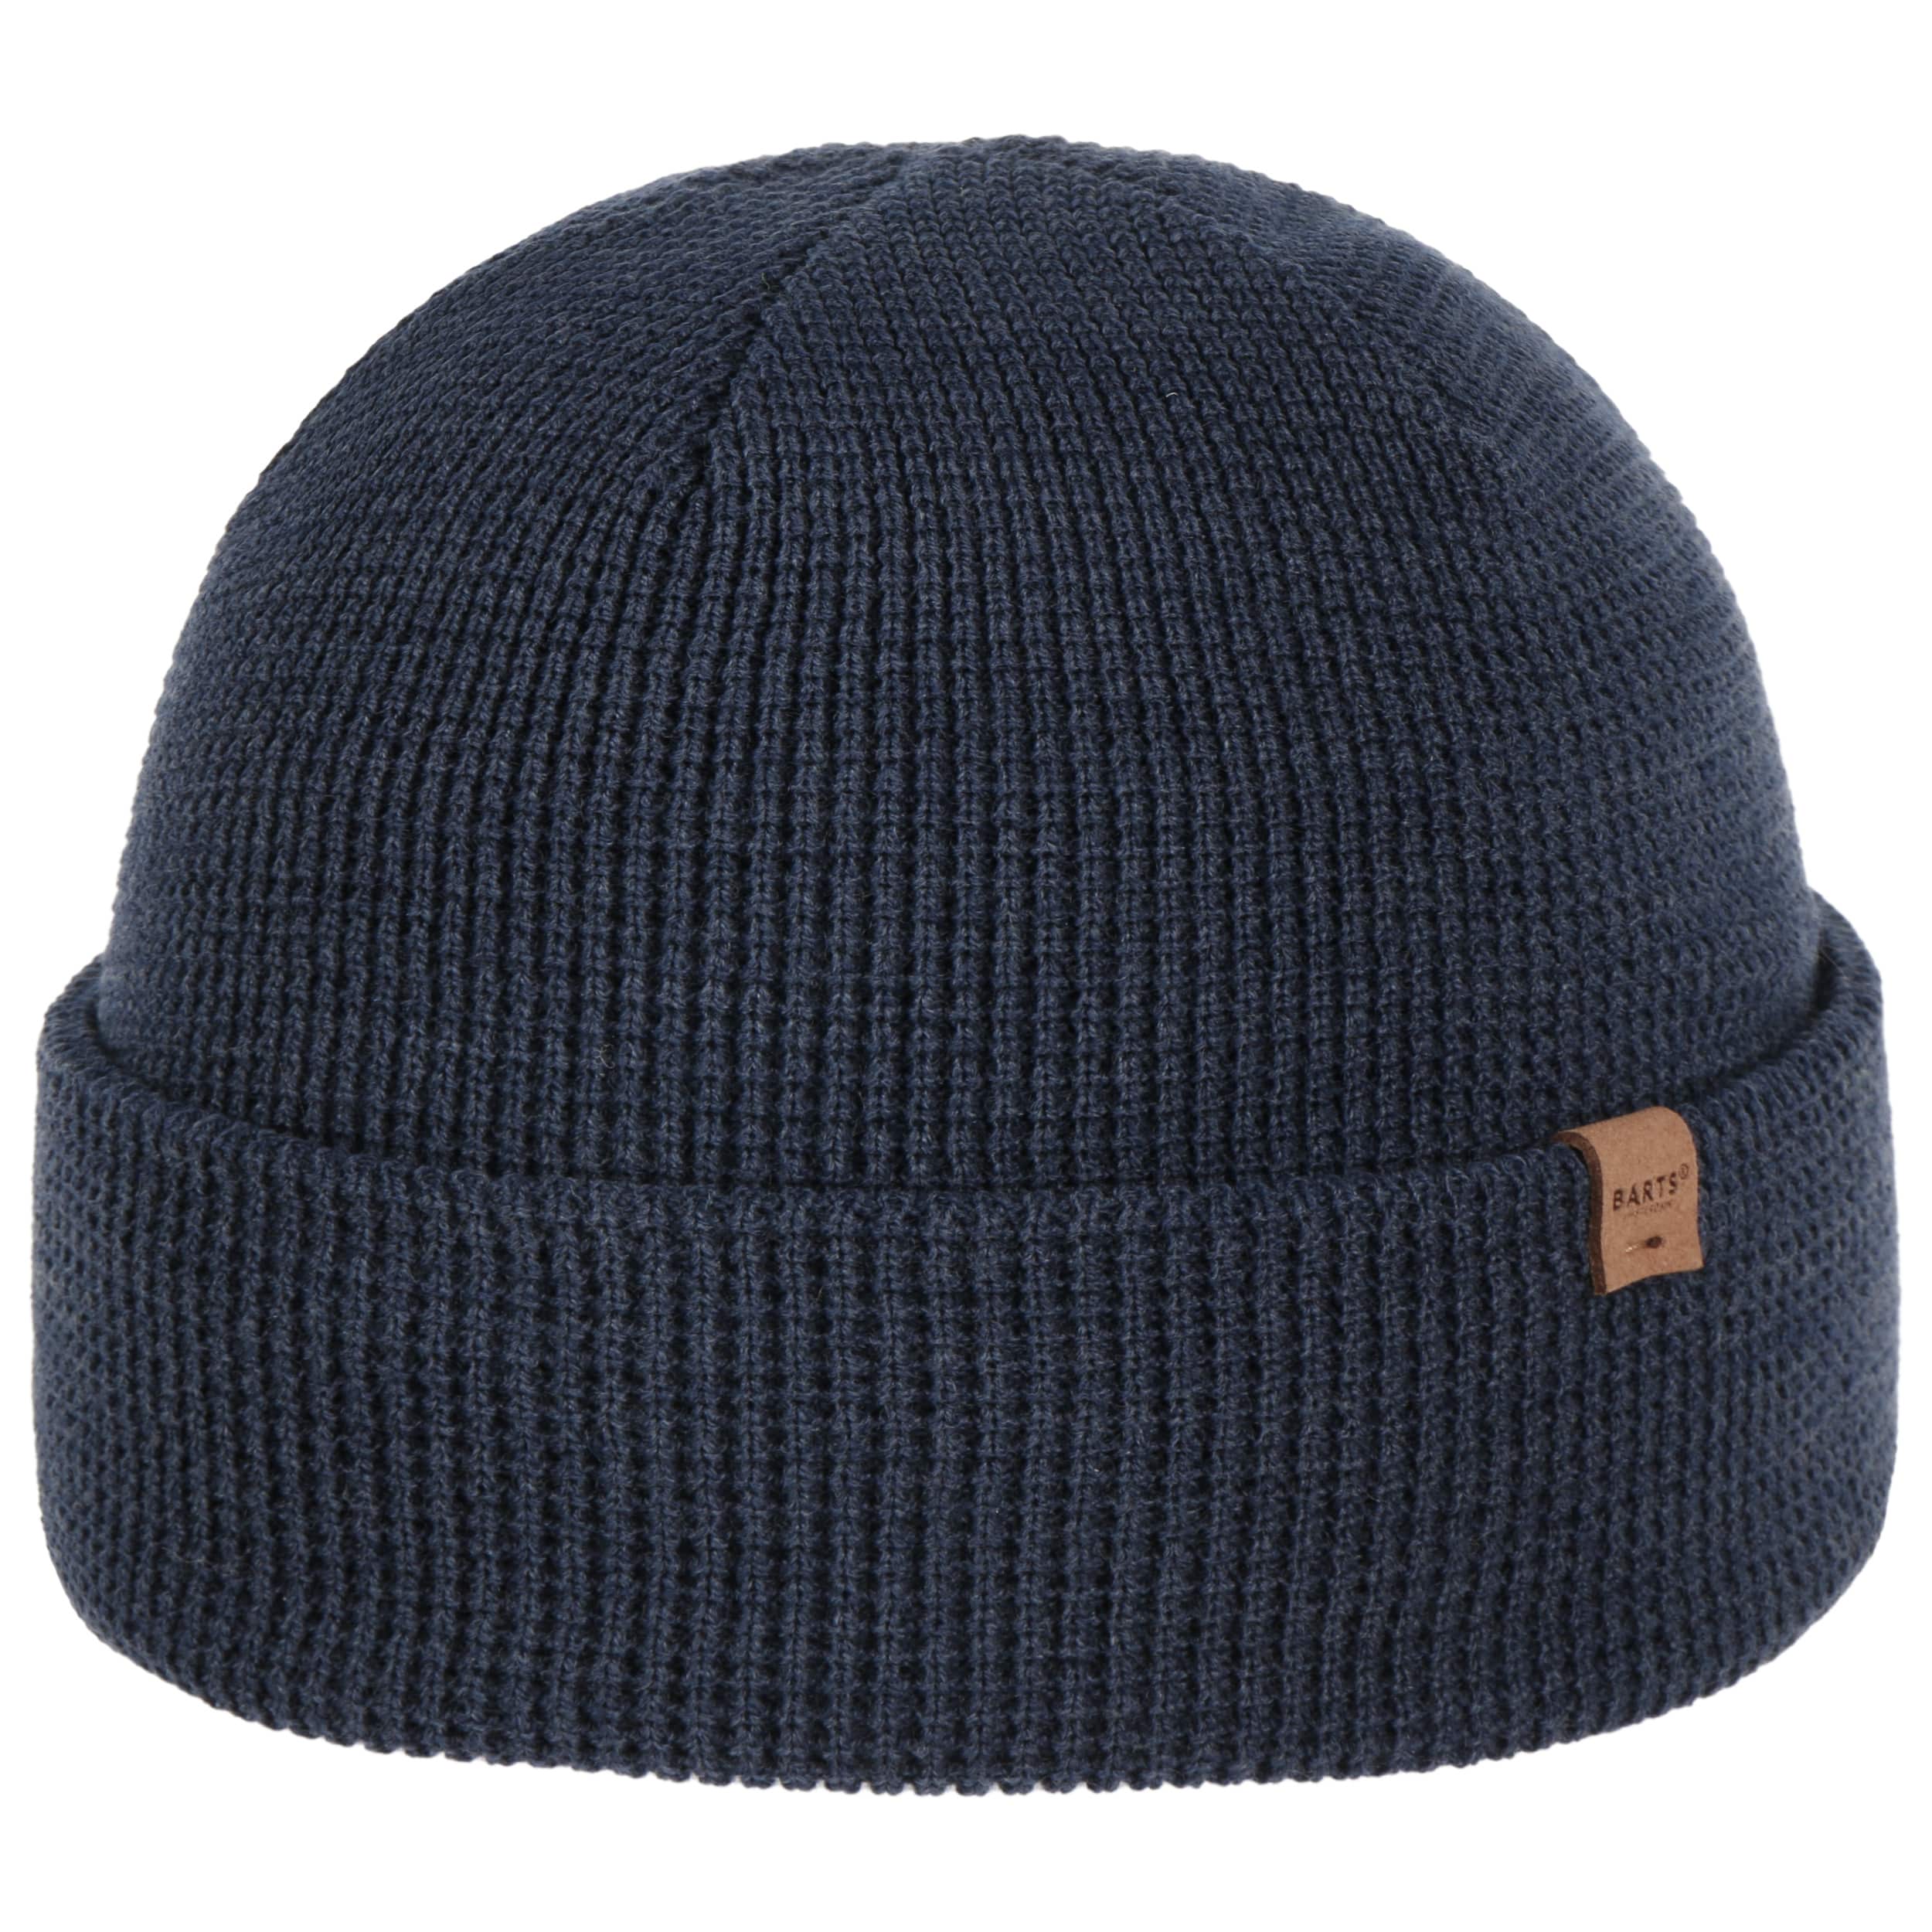 Coler Beanie Hat by Barts 26,95 € 